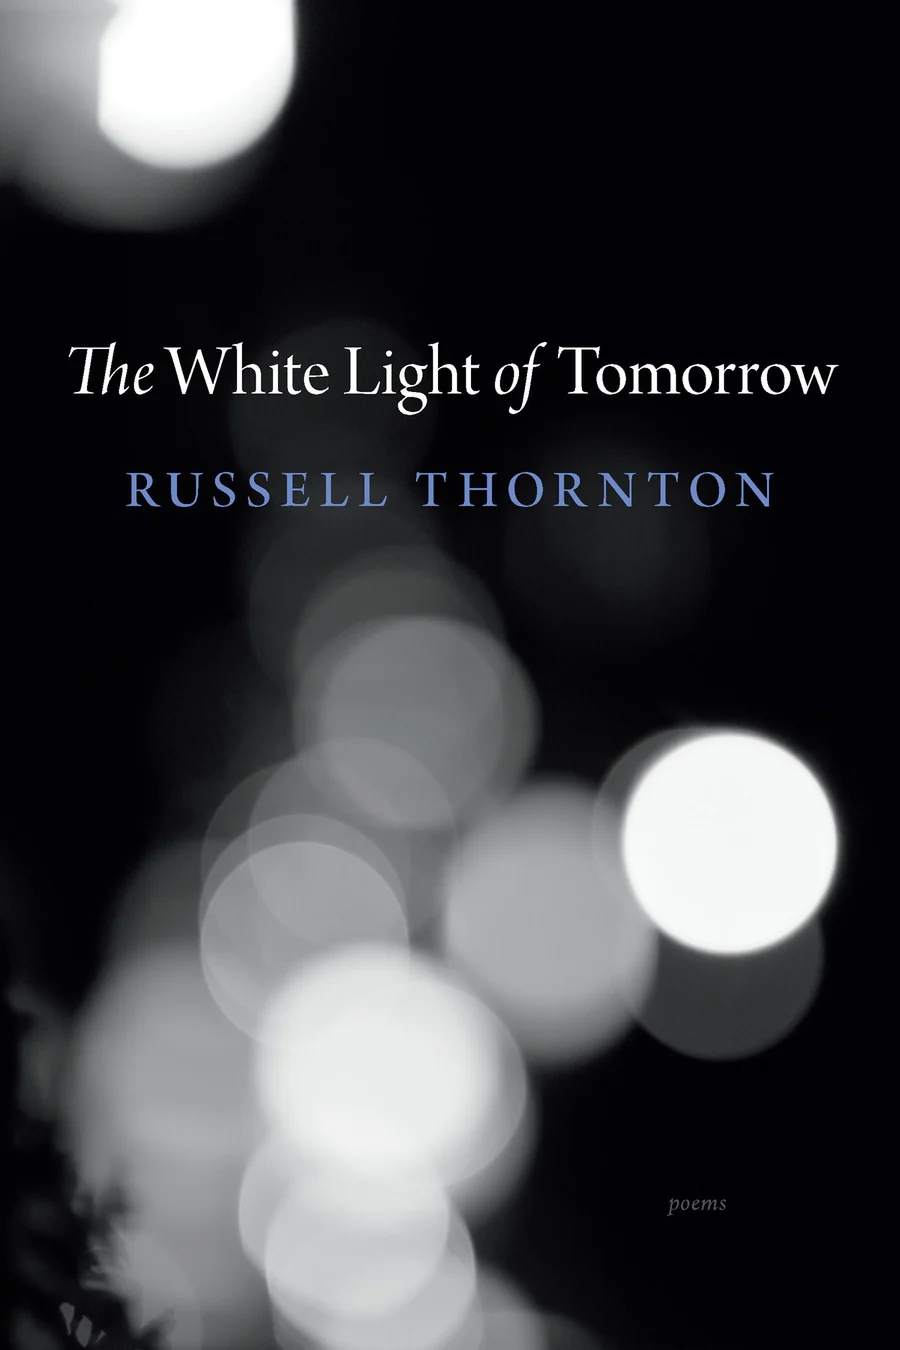 The cover of The White Light of Tomorrow by Russell Thornton.